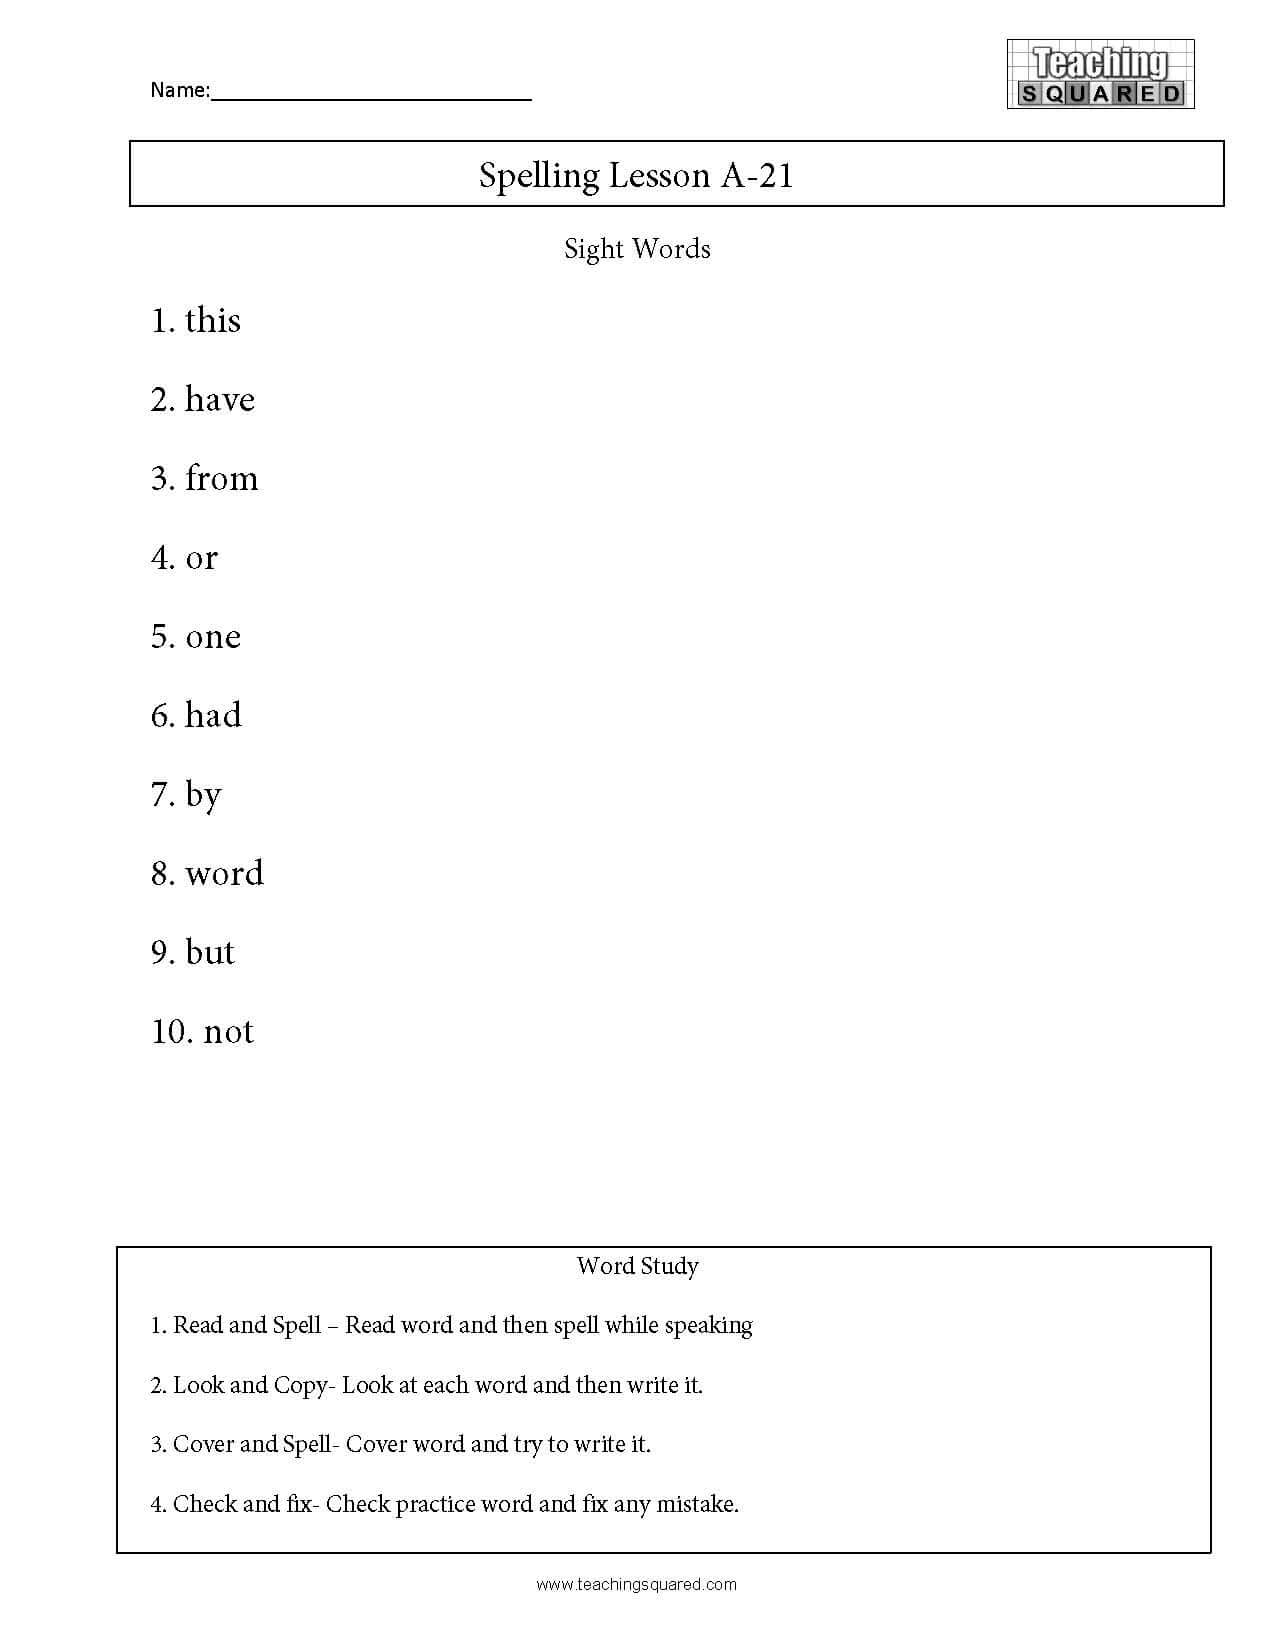 Spelling List Words A